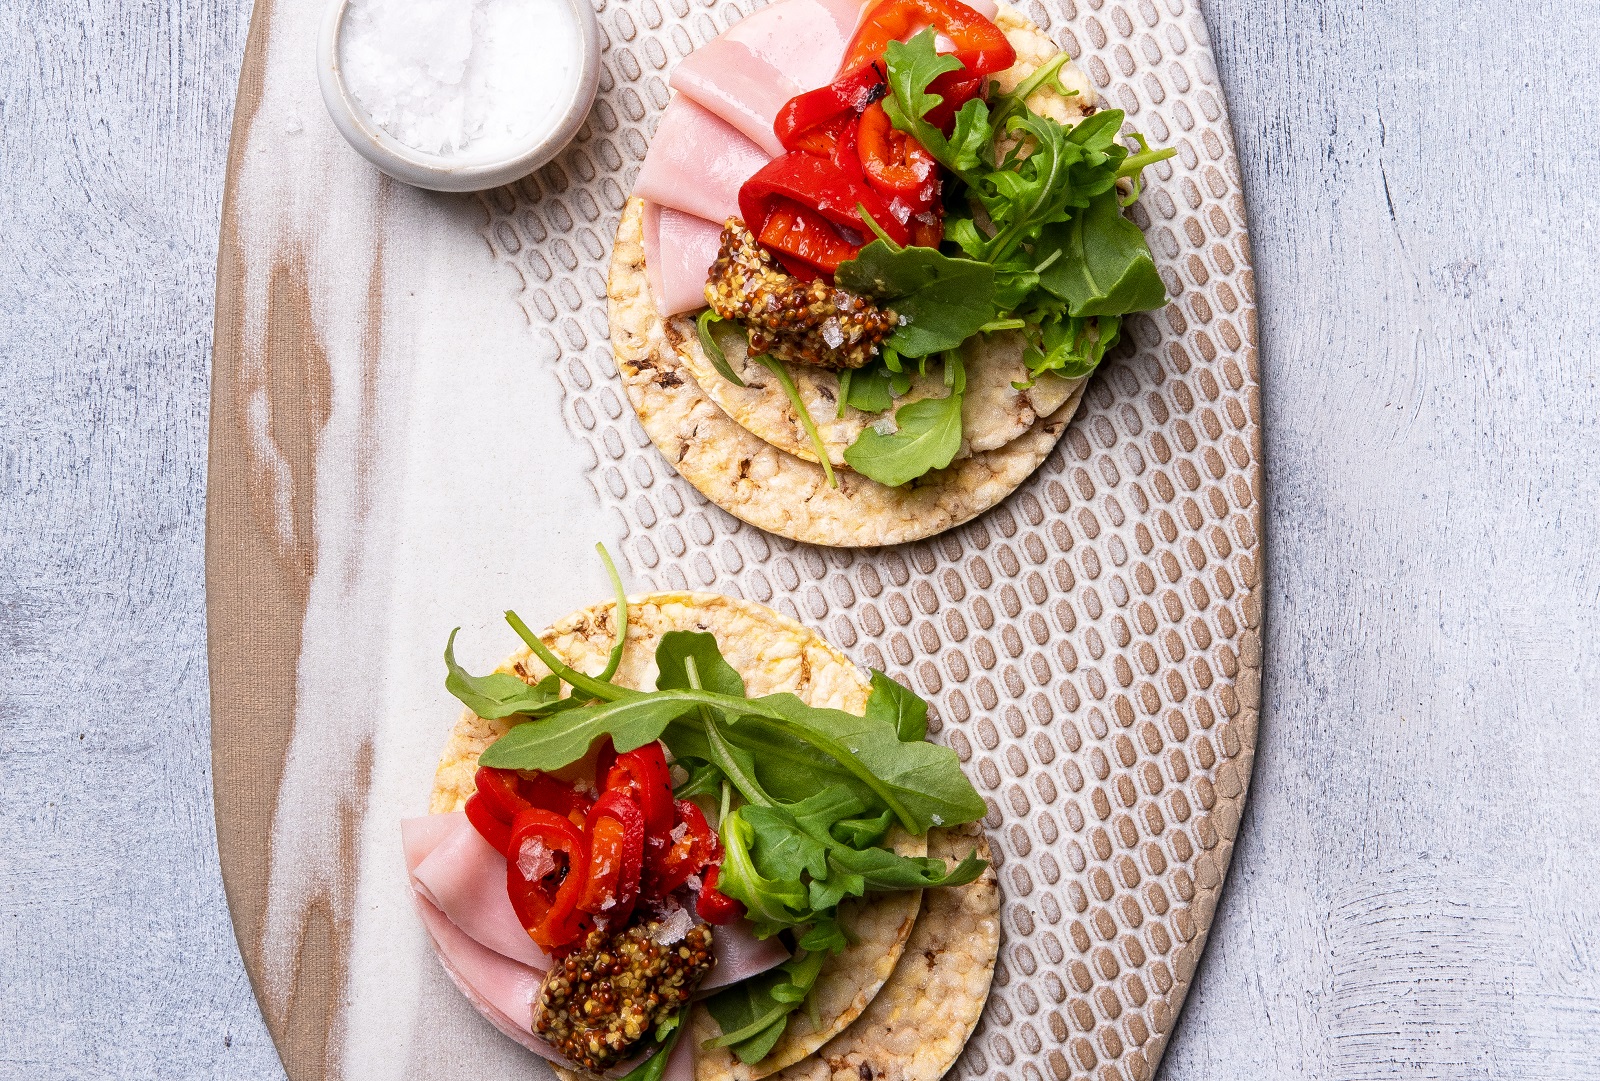 Ham, Charred Capsicum, Rocket & Mustard on Corn Thins slices for lunch